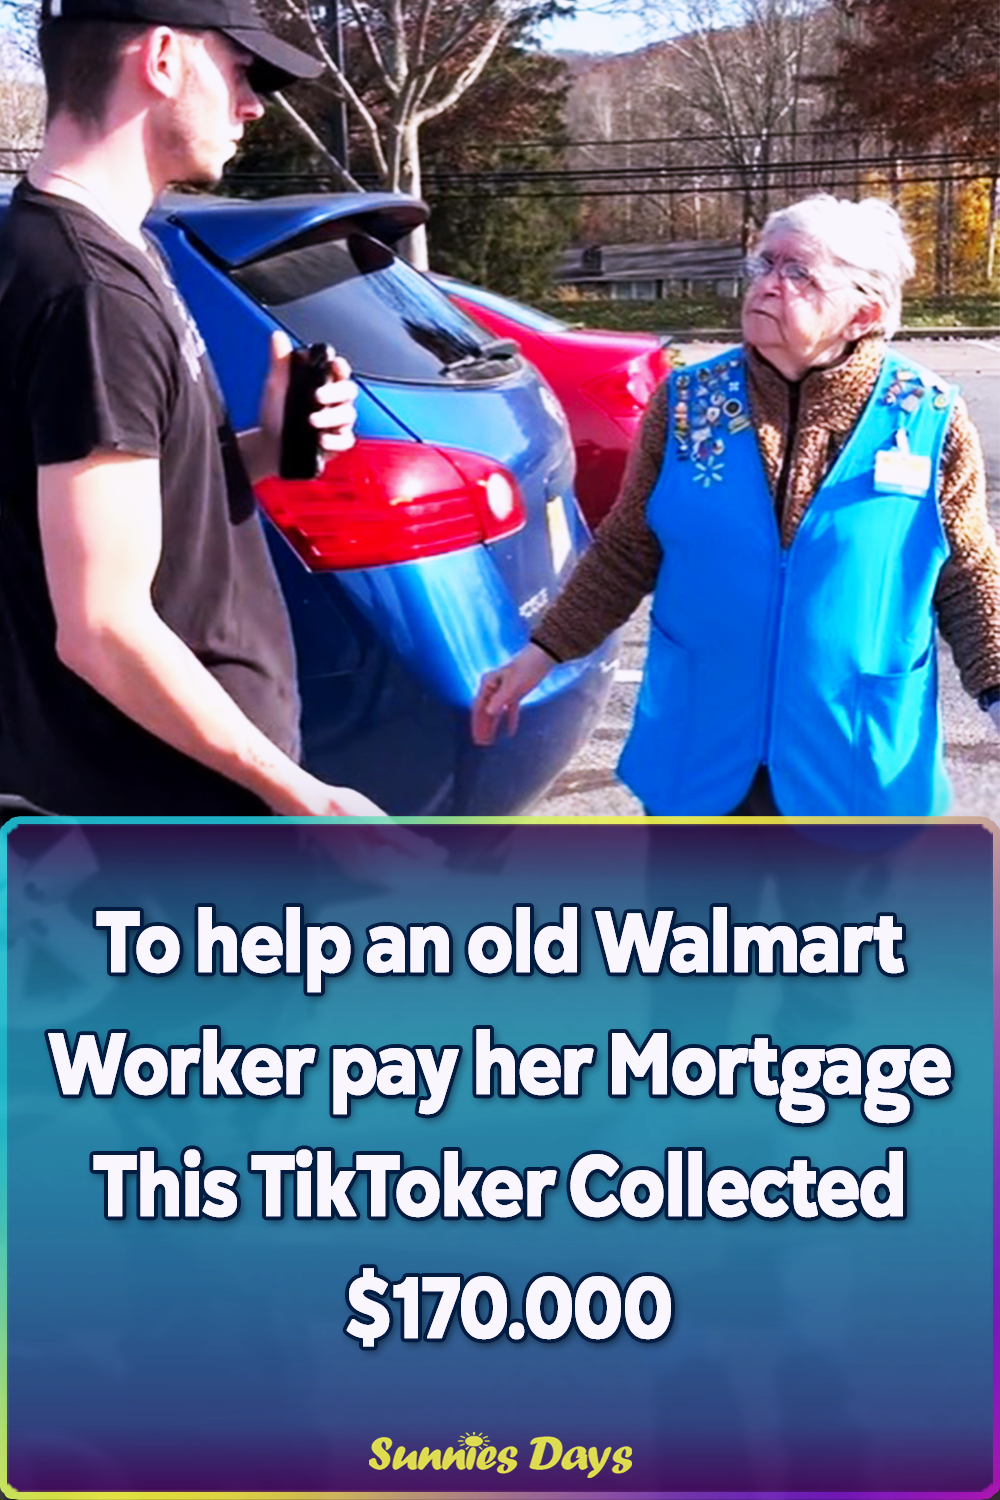 elderly workers in walmart, uplifting story that will restore your faith in humanity, this tiktoker will restore your faith in humanity, how to donate for elderly people, how to help elederly workers, walmart worker, unspiring story that will restore your faith in humanity